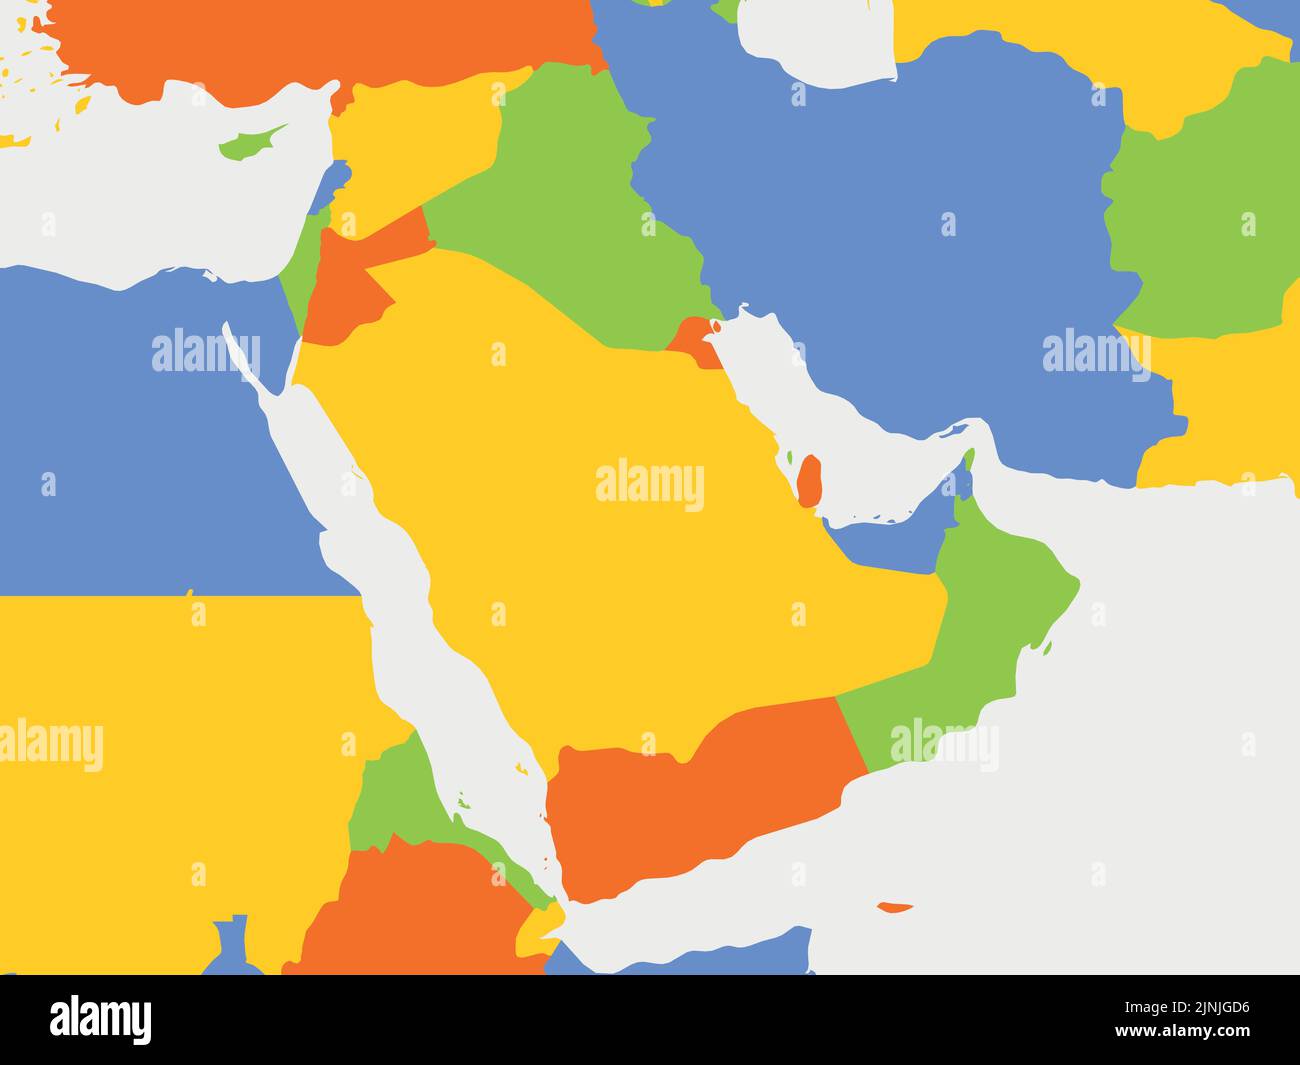 Political map of Middle East and Arabian Peninsula Stock Vector